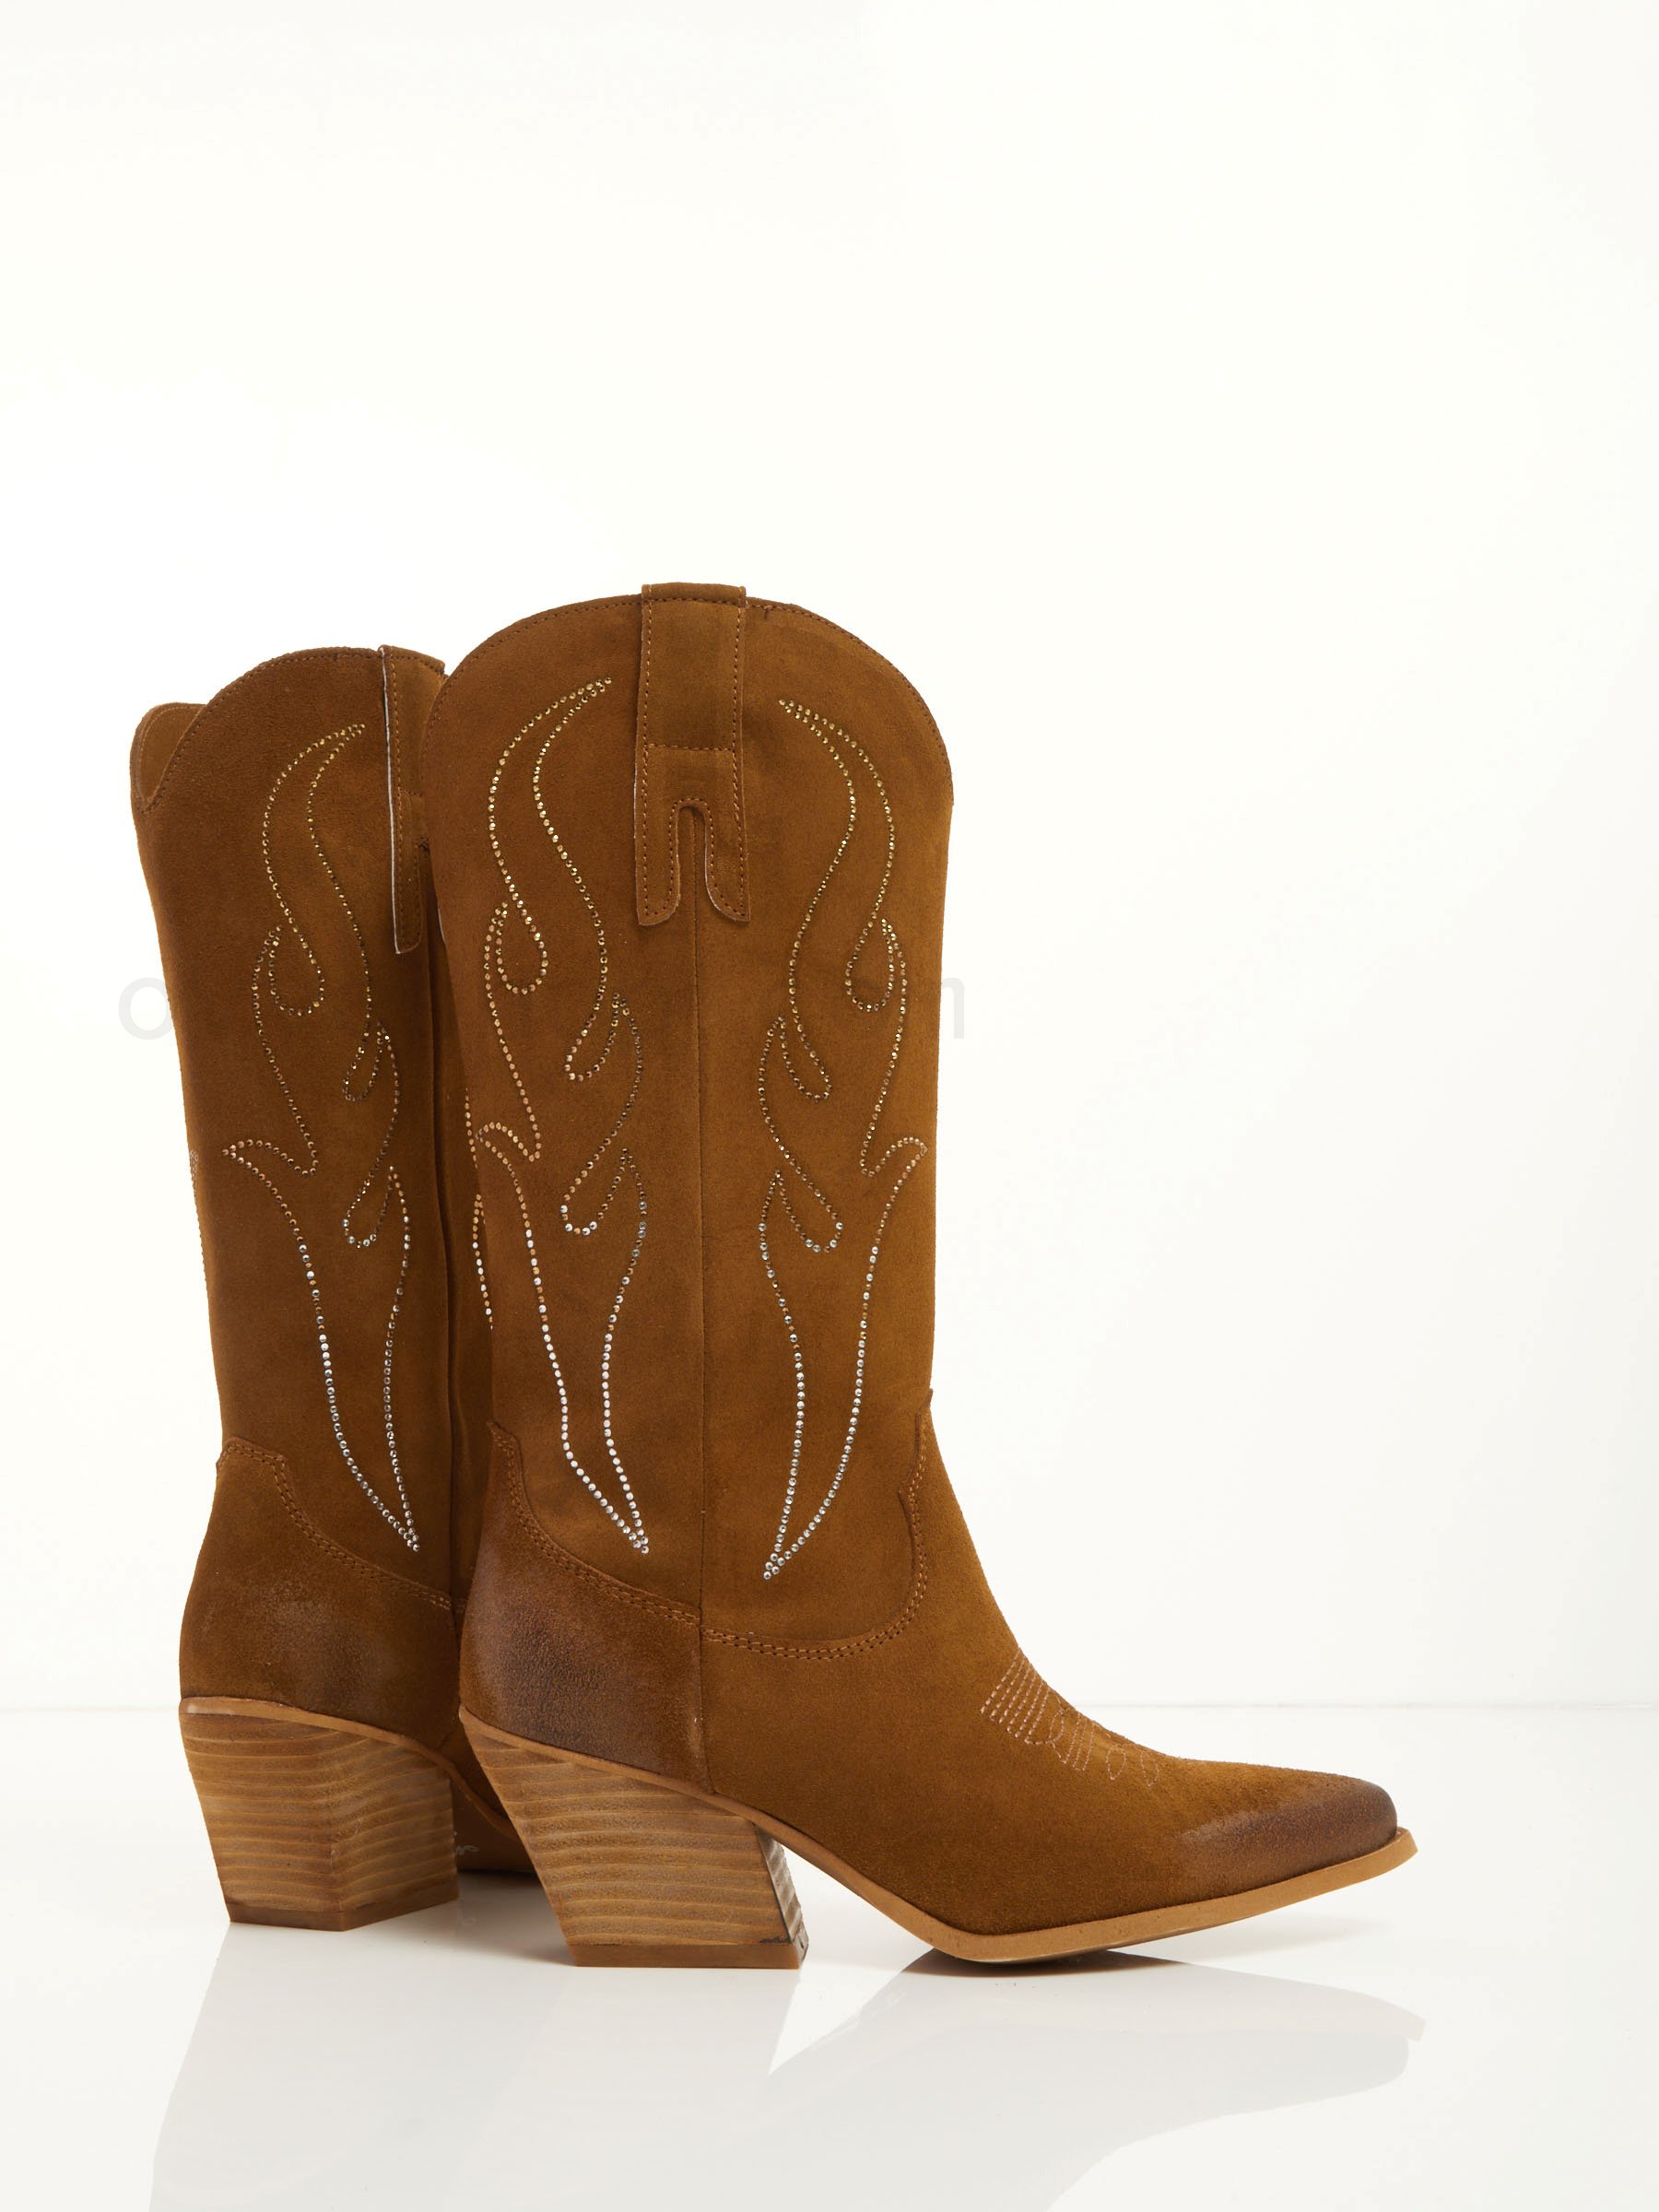 ovy&#233; outlet Suede Cowboy Boots With Rhinestones F0817885-0528 Shop On Line